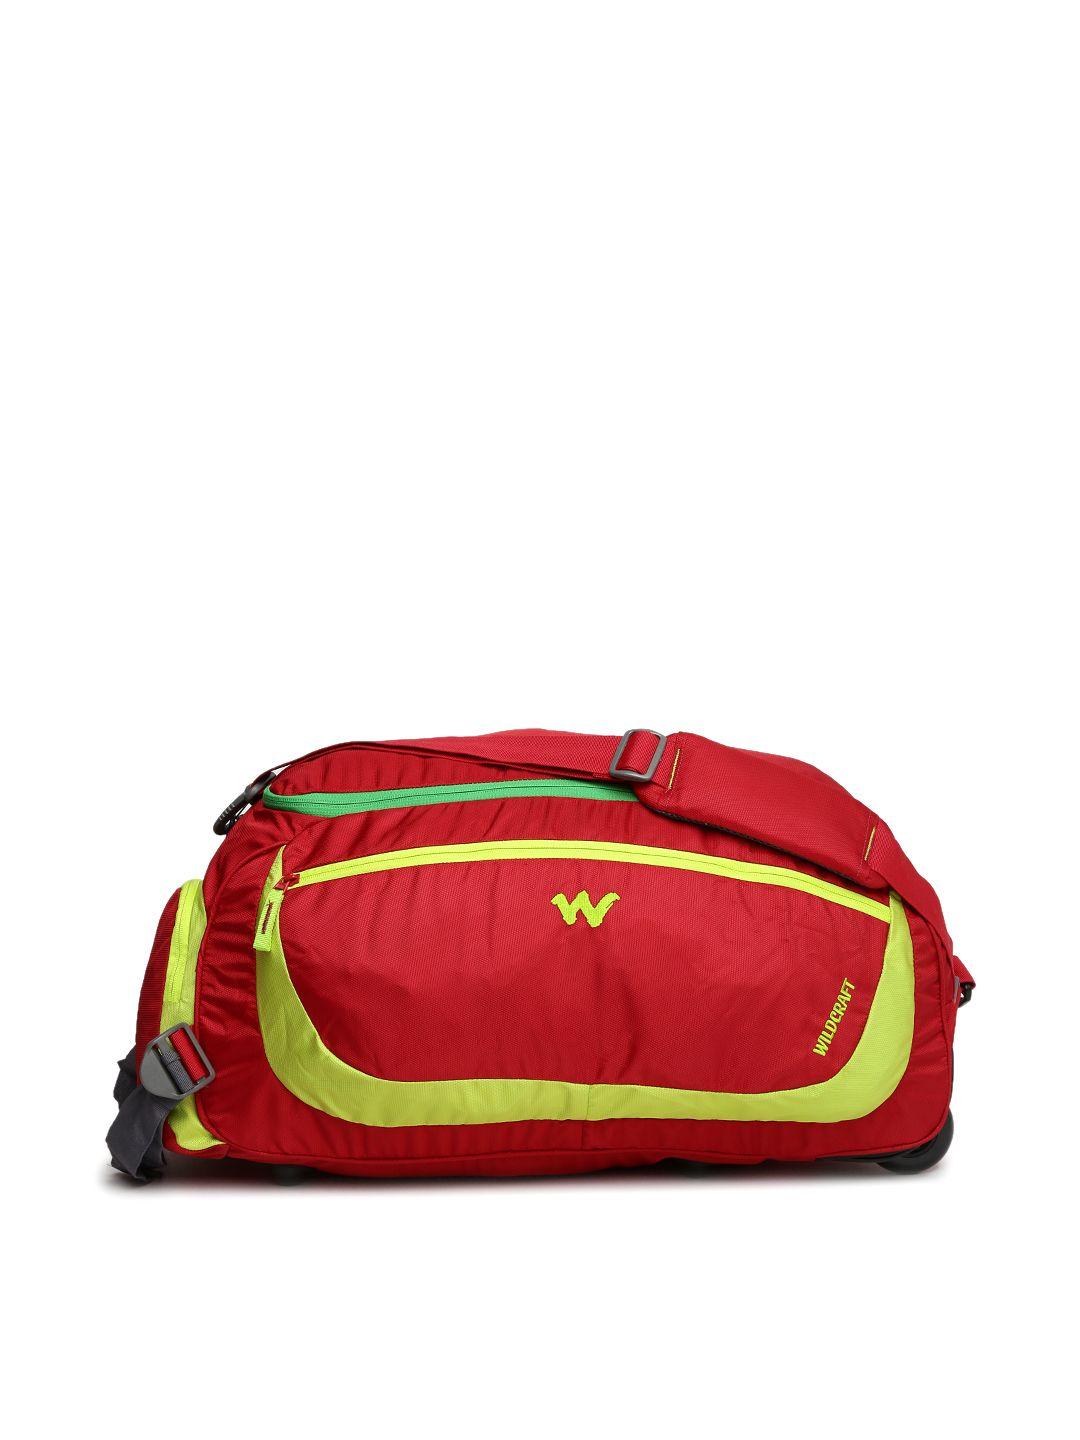 wildcraft unisex red rover duffel bag with skate wheels